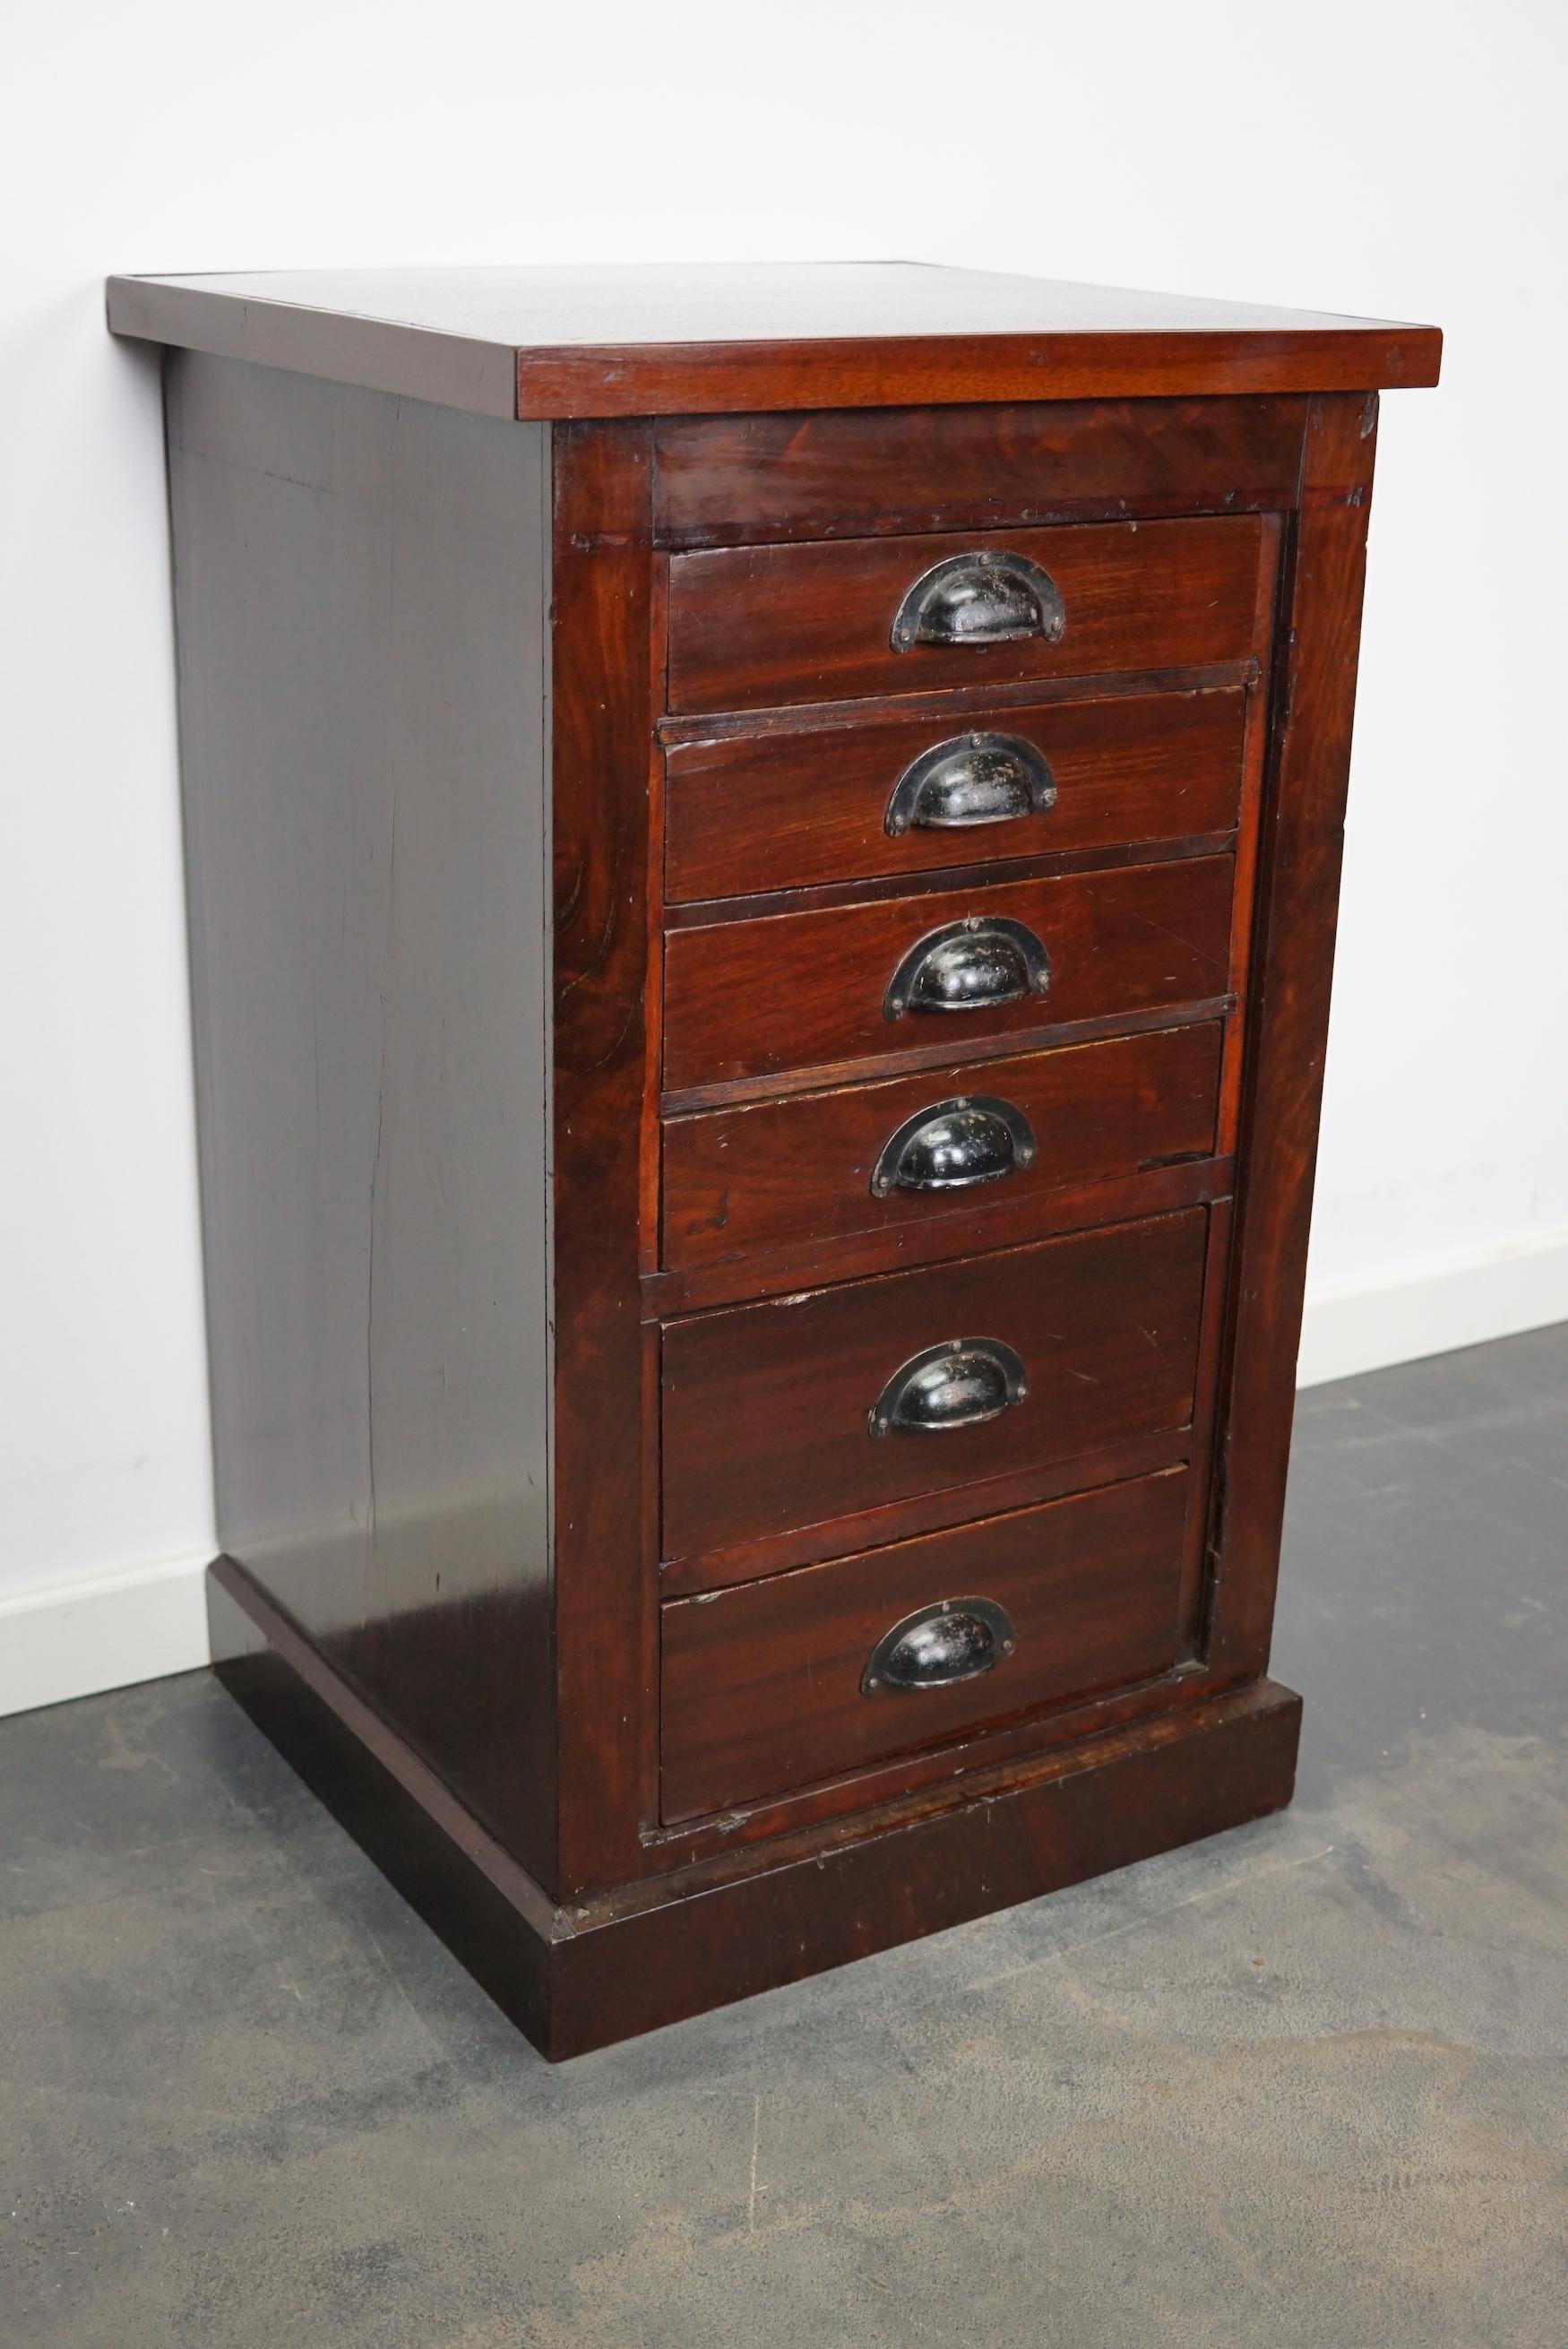 This cabinet was designed and made in circa 1930s in the Netherlands. It features 6 drawers and is made of mahogany with black handles. The cabinet is in a good vintage condition. The inside drawer measurements are DWH: 32 x 29 x 6 / 10 cm.